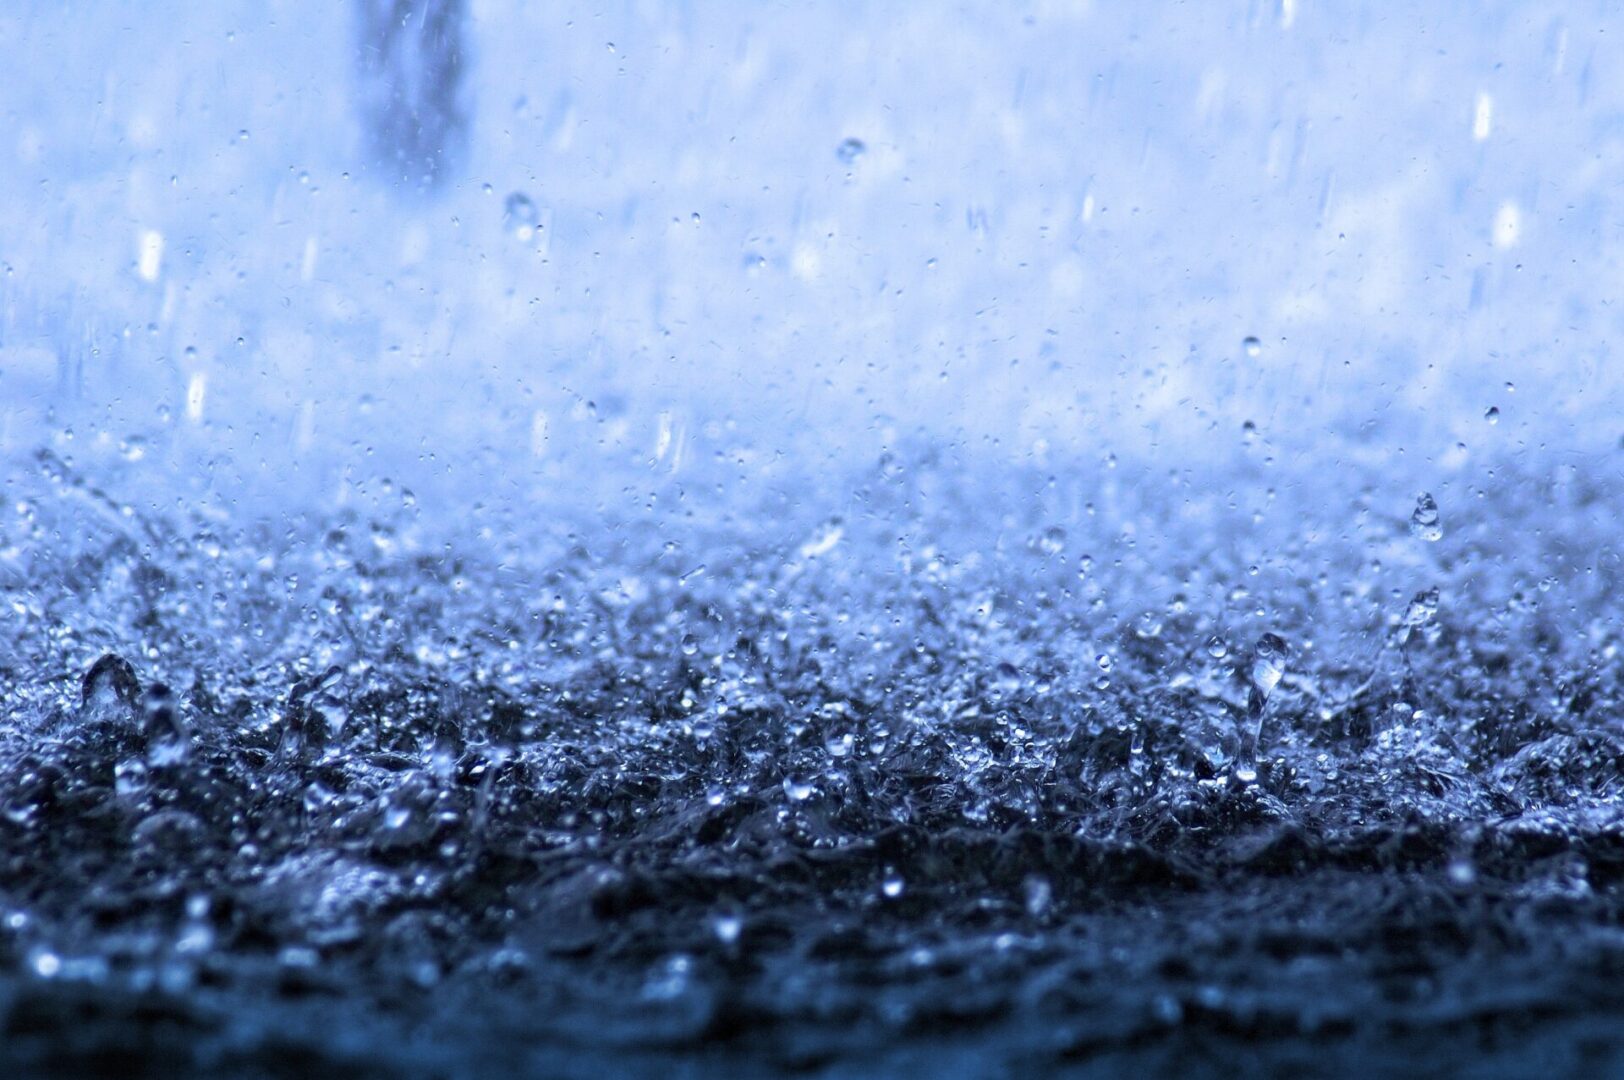 A close up of water pouring on the ground